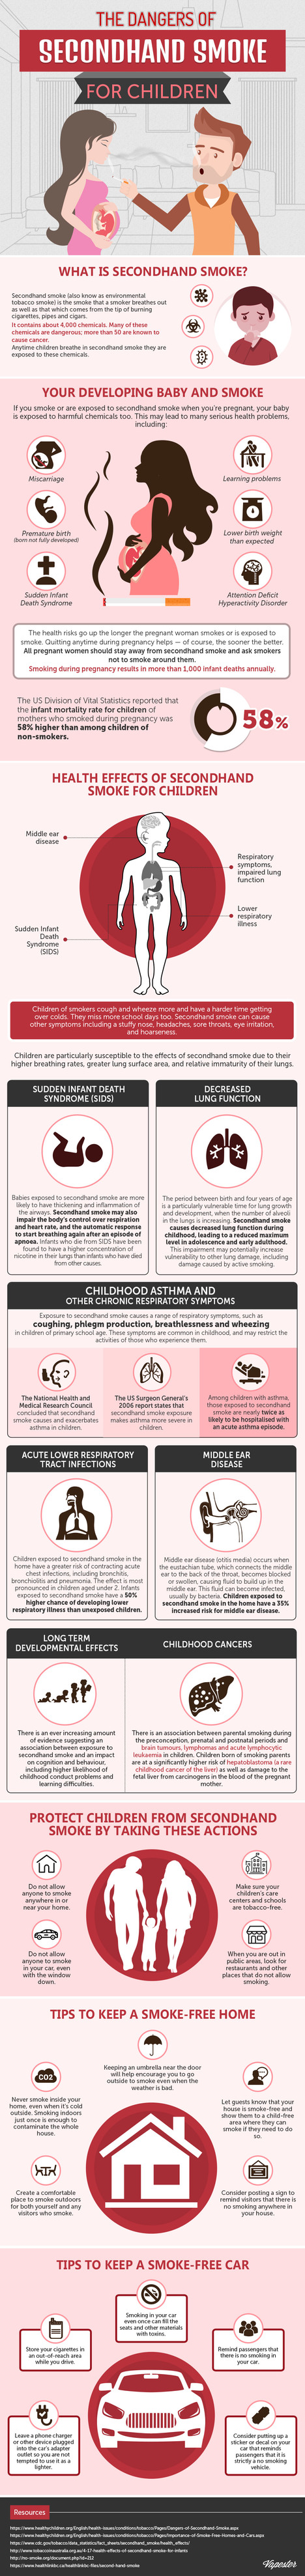 The Dangers Of Secondhand Smoke For Children